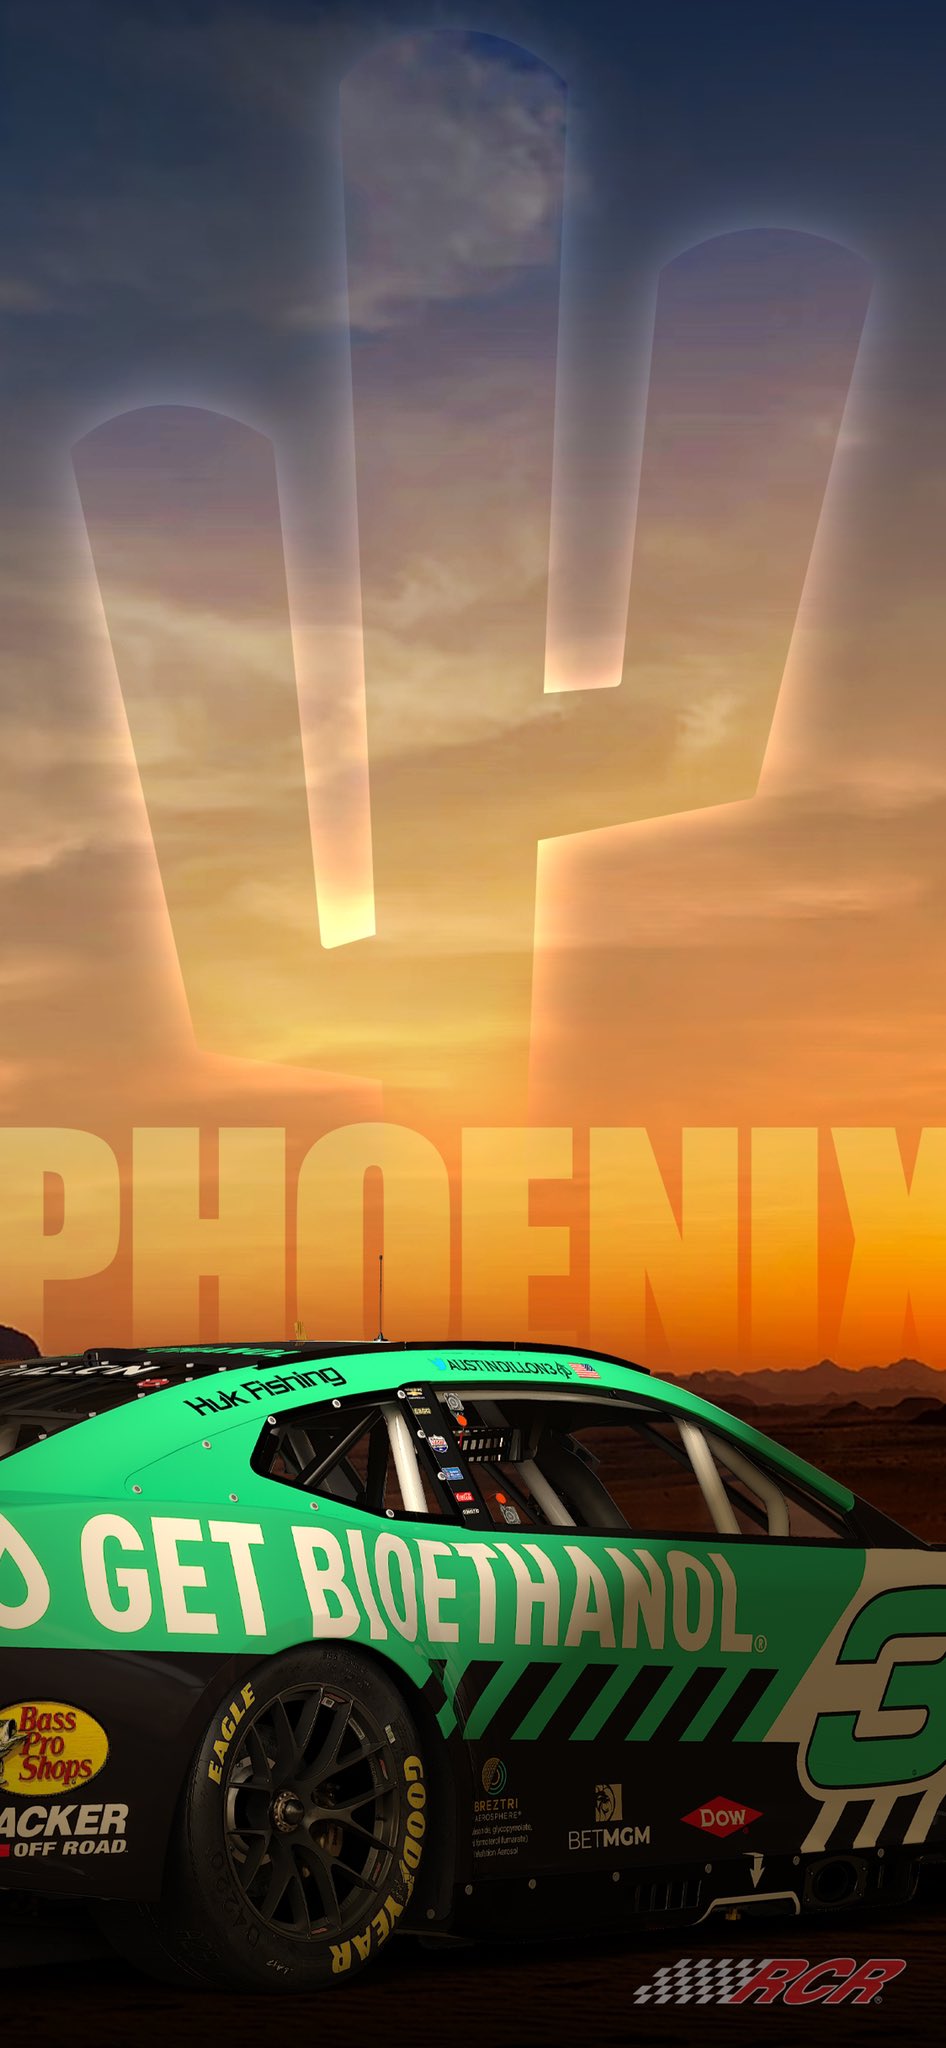 RCR on X: Phoenix wallpapers have arrived! @GetBioethanol